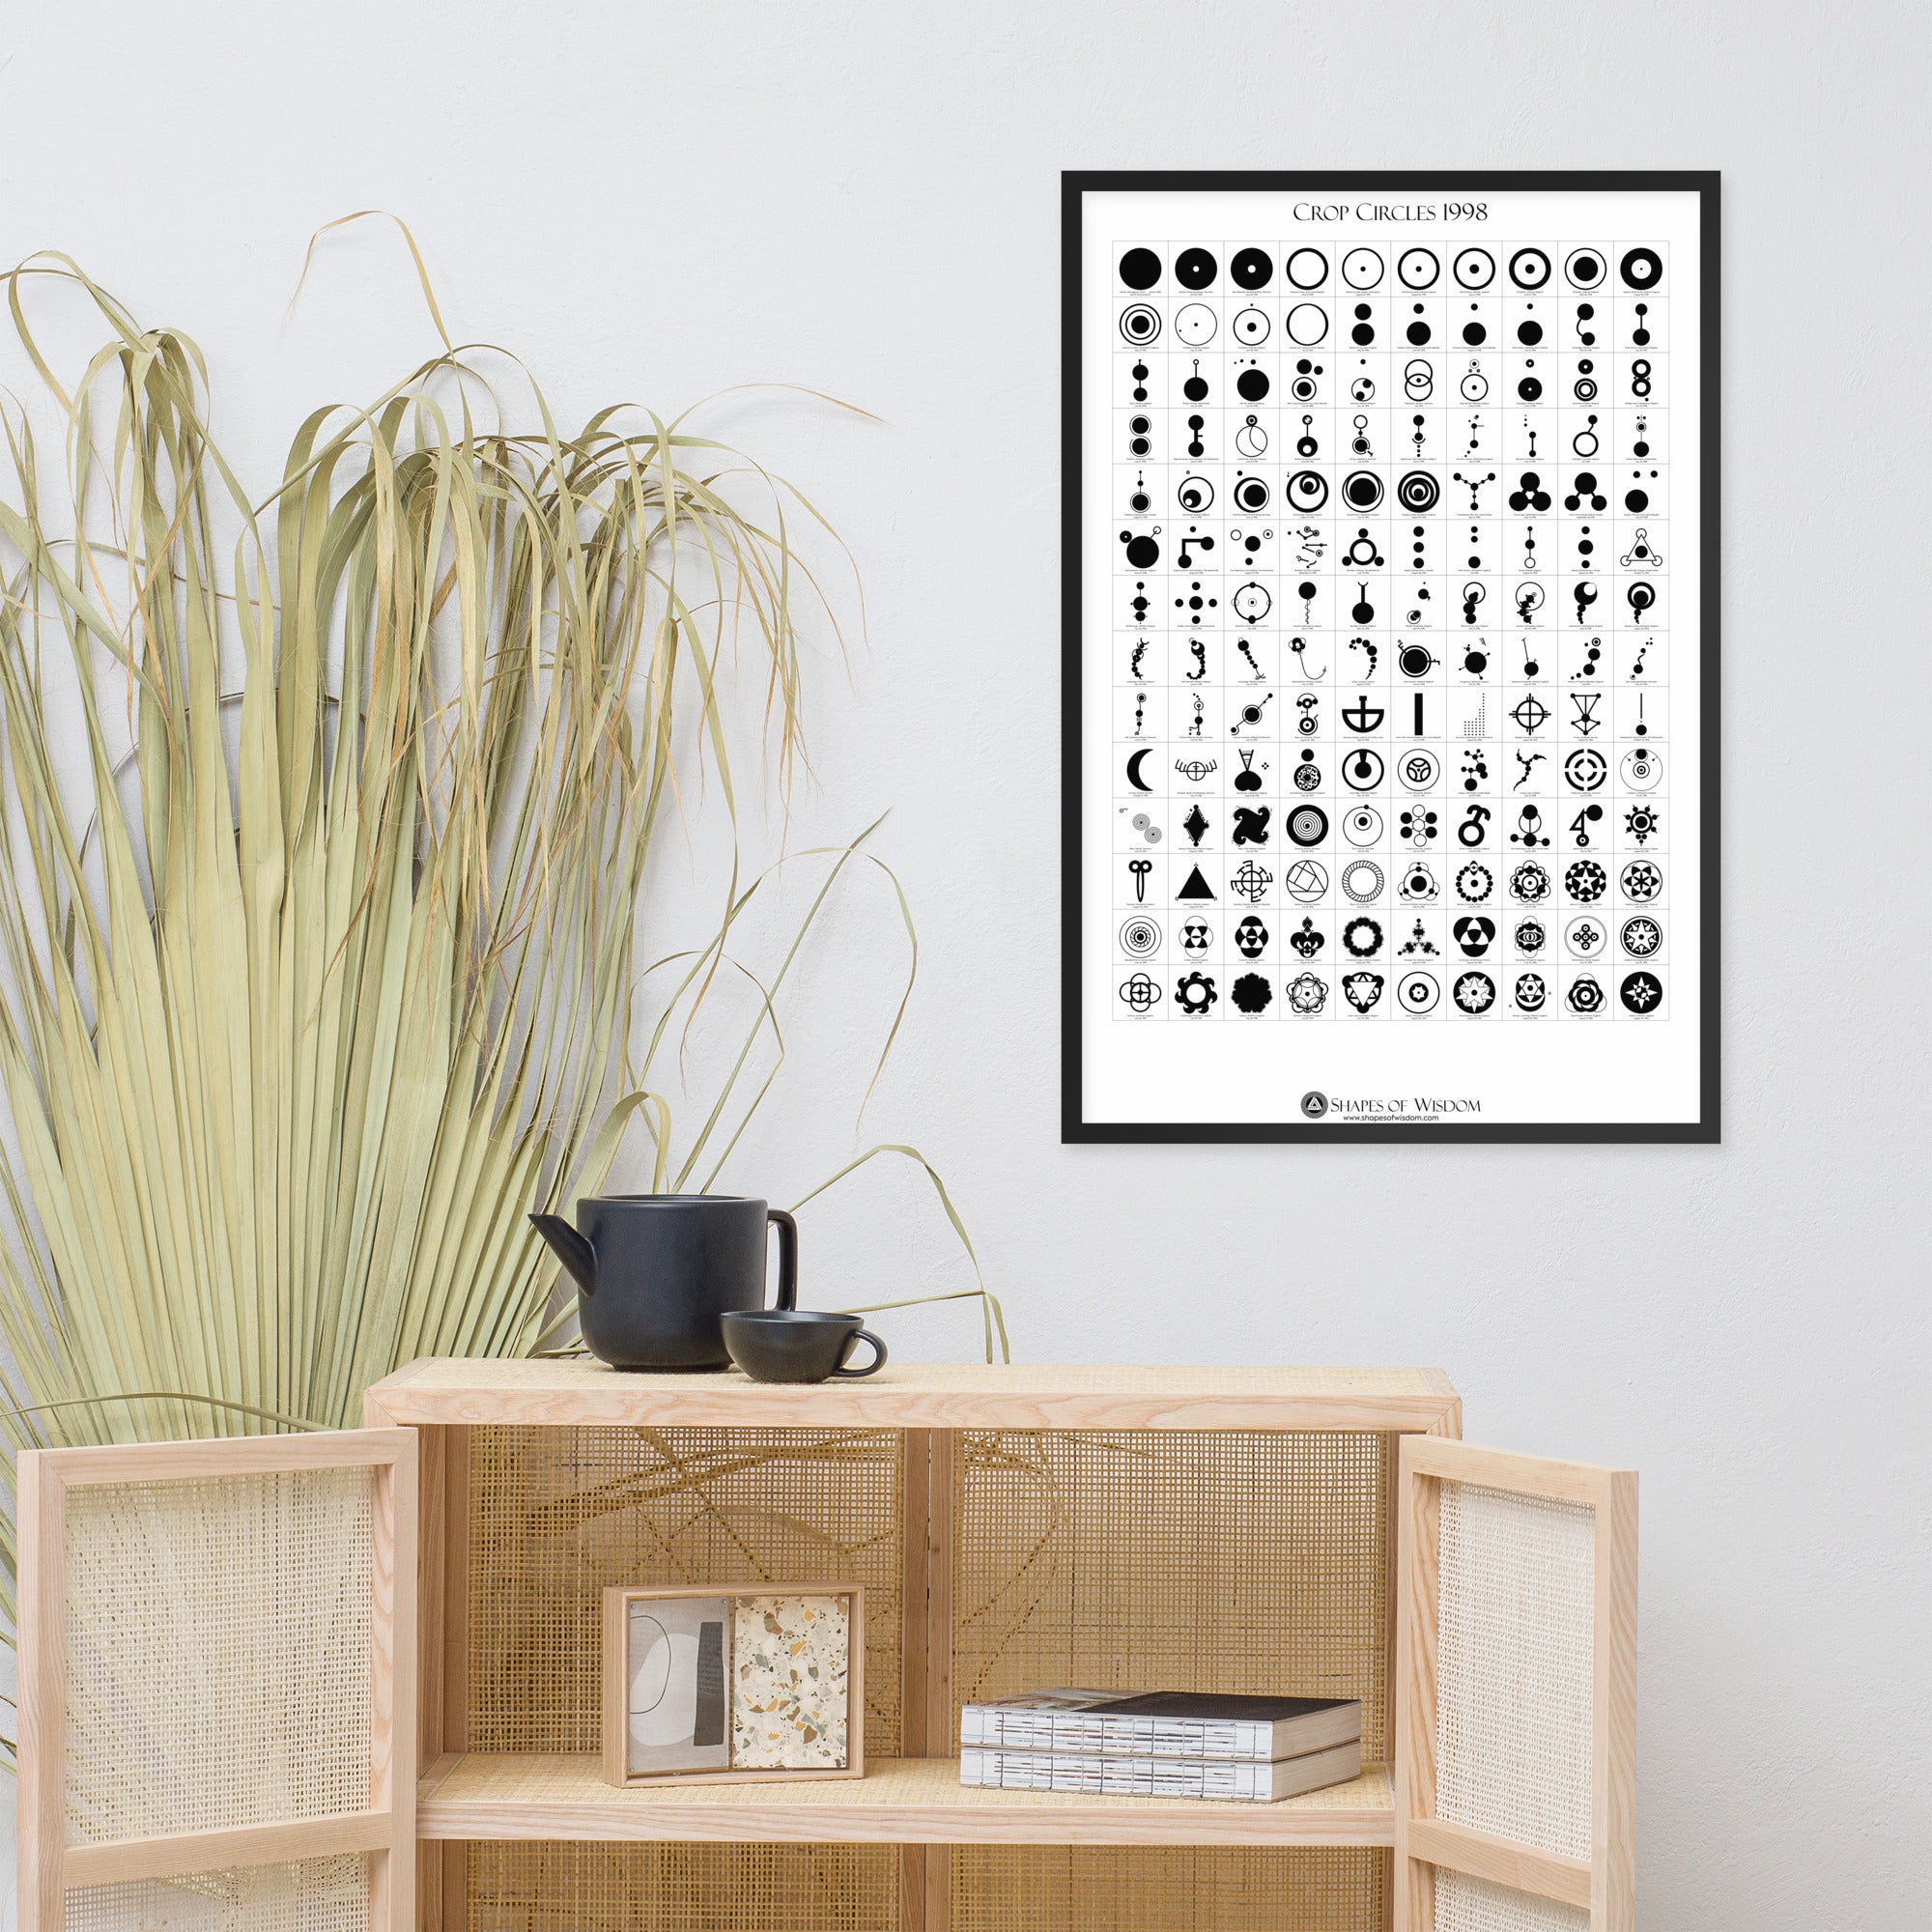 Crop Circles 1998 Framed Poster - Shapes of Wisdom